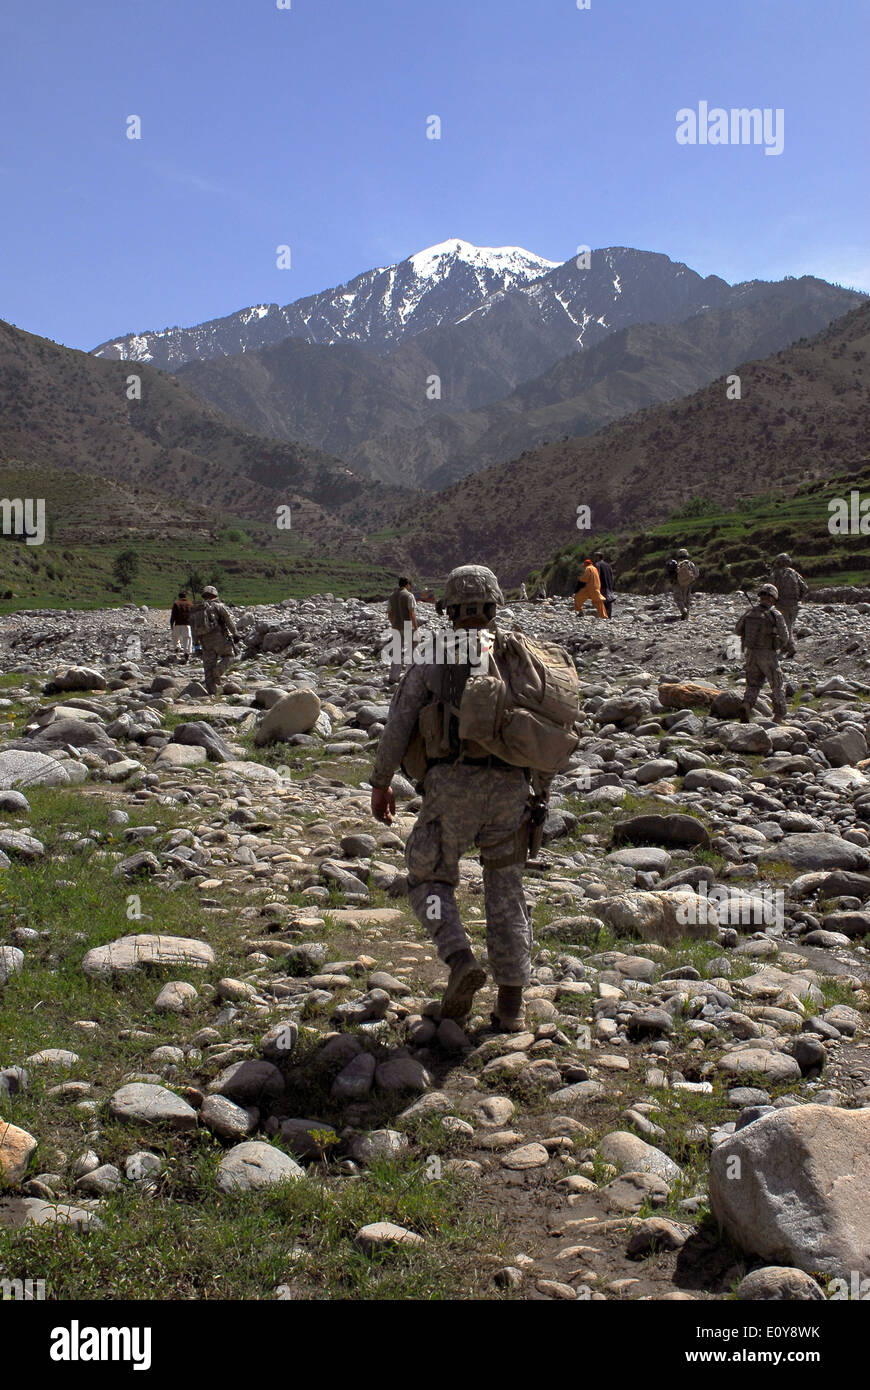 US Army soldiers patrol along a riverbed during a mission in the mountains April 19, 2009 in Kunar province, Afghanistan. Stock Photo